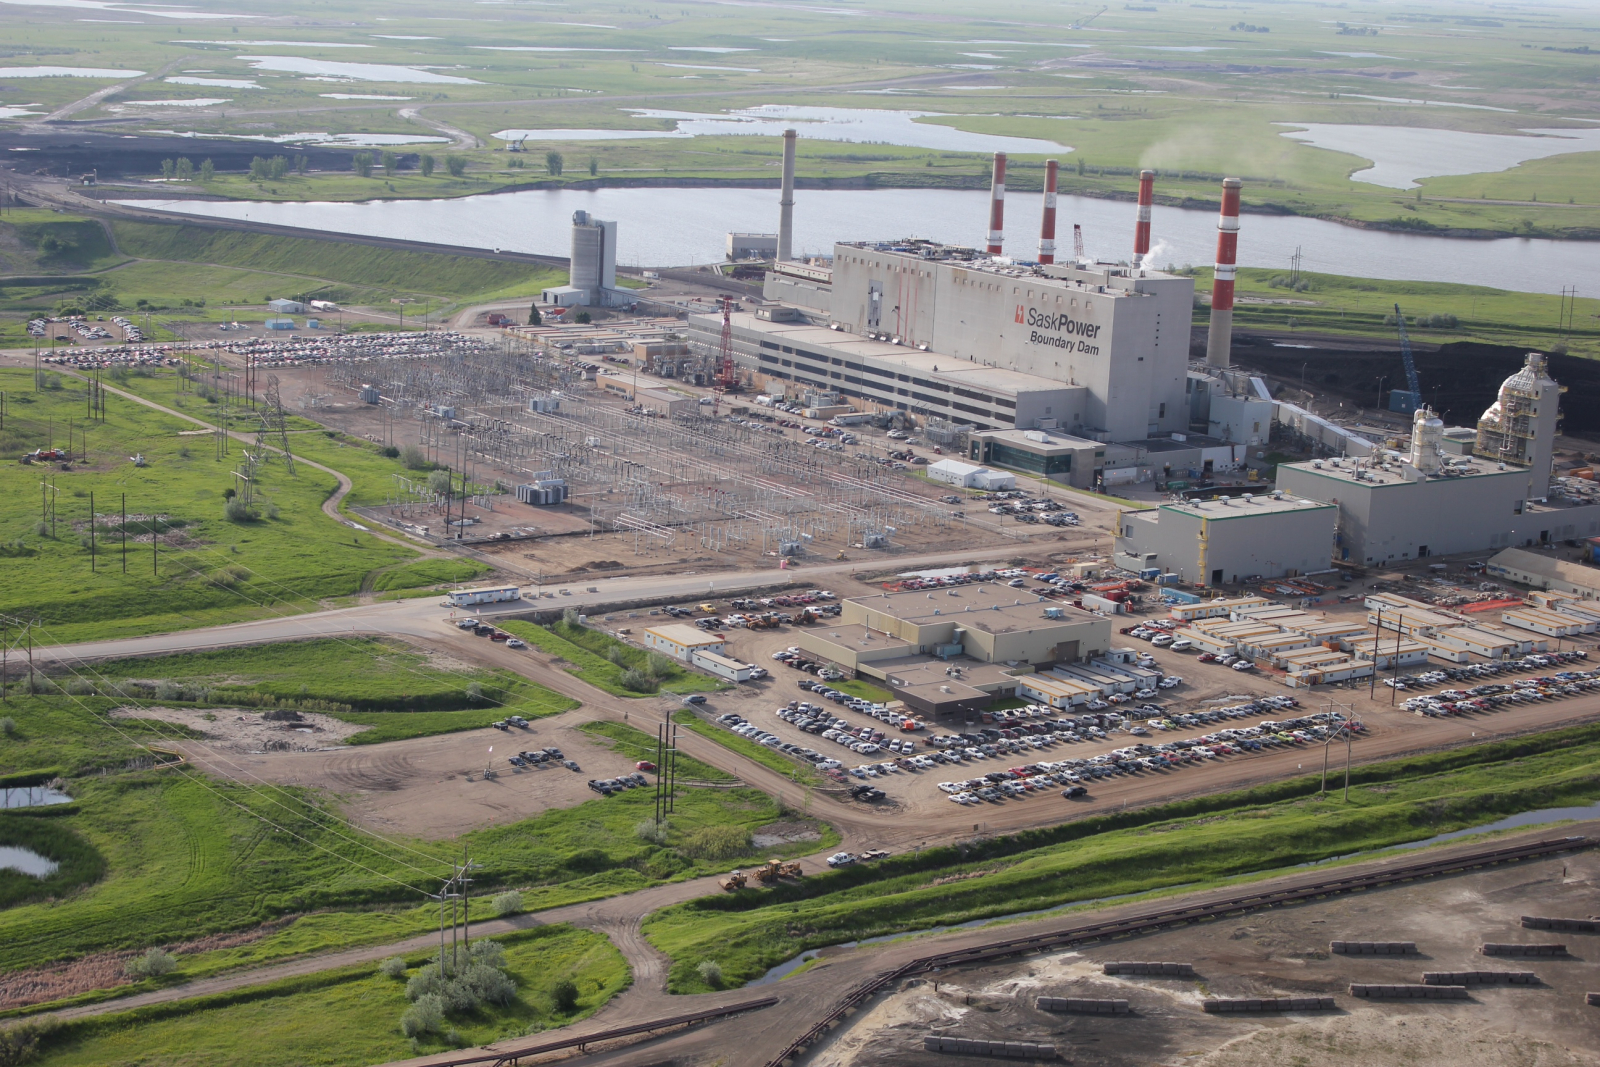 Coal powerplant outfitted with CCS technology